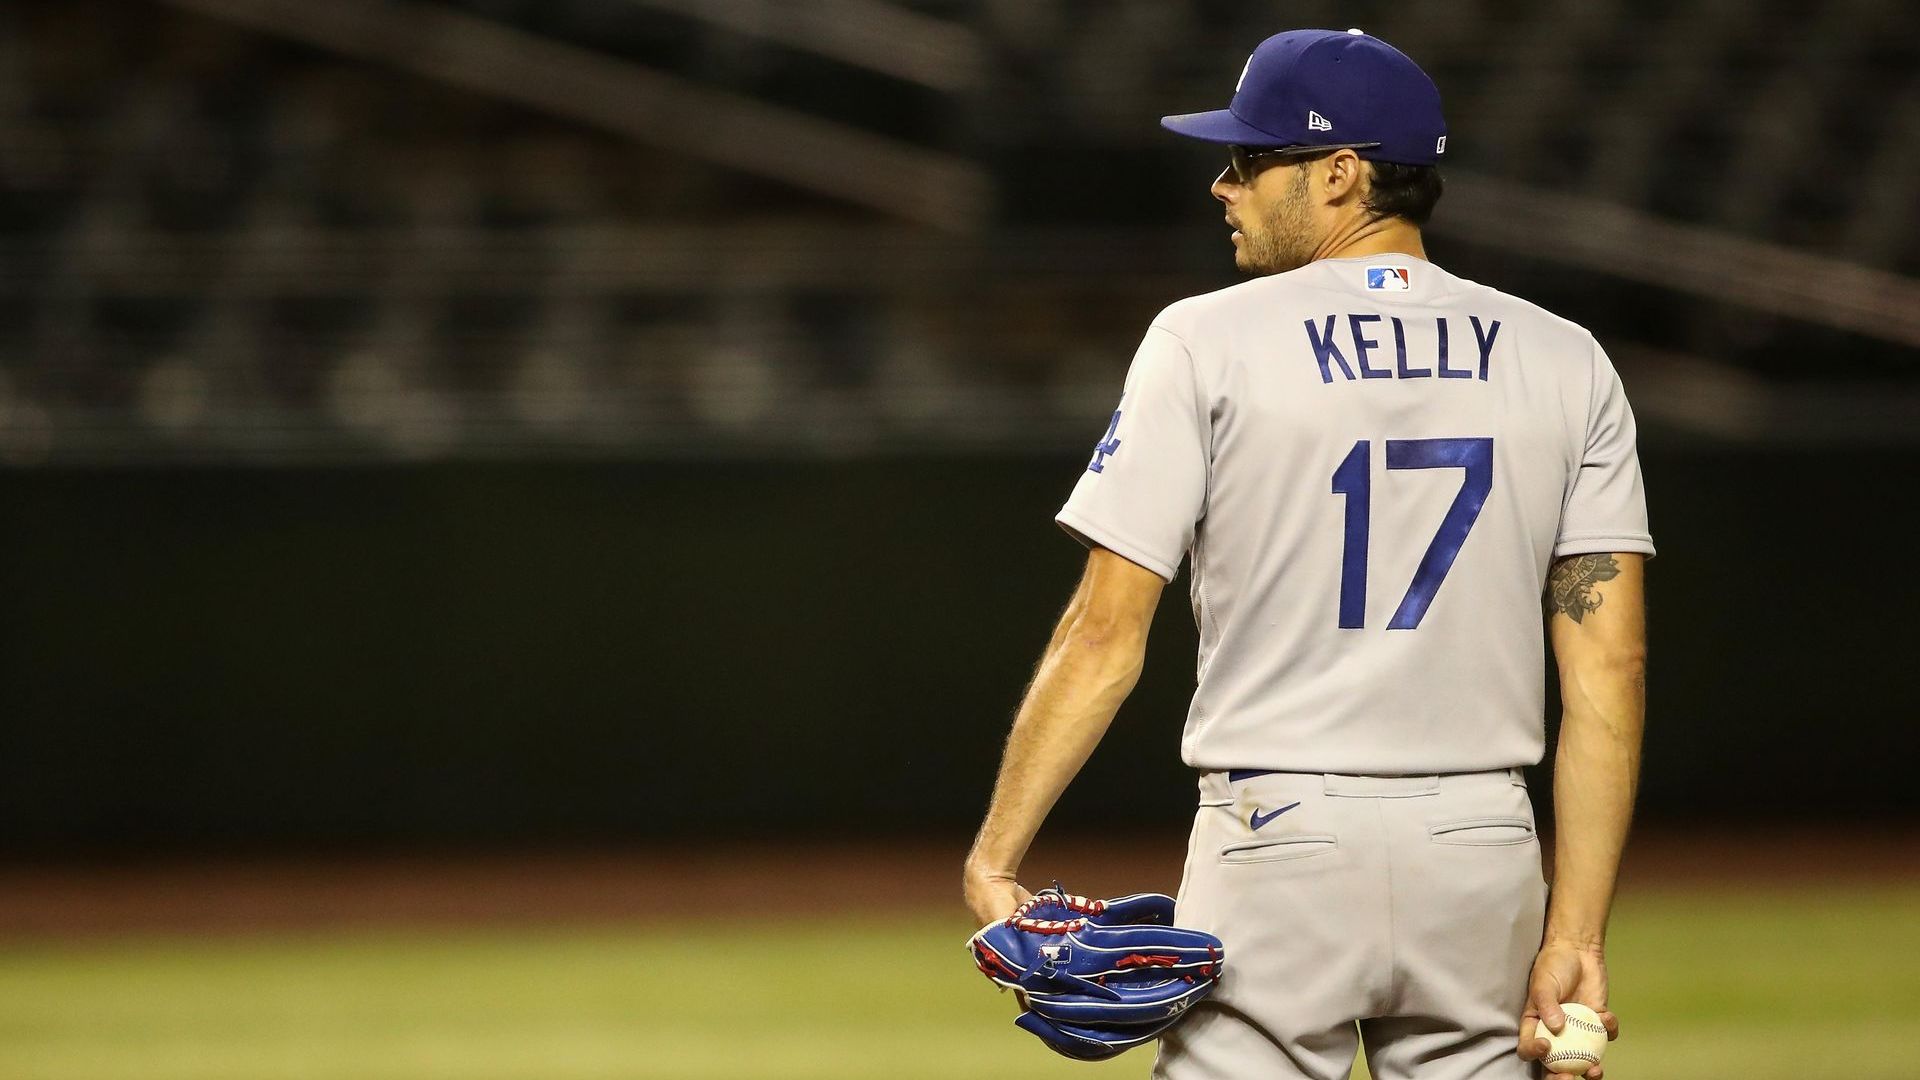 Dodgers' Joe Kelly calls Astros snitches over sign-stealing in podcast